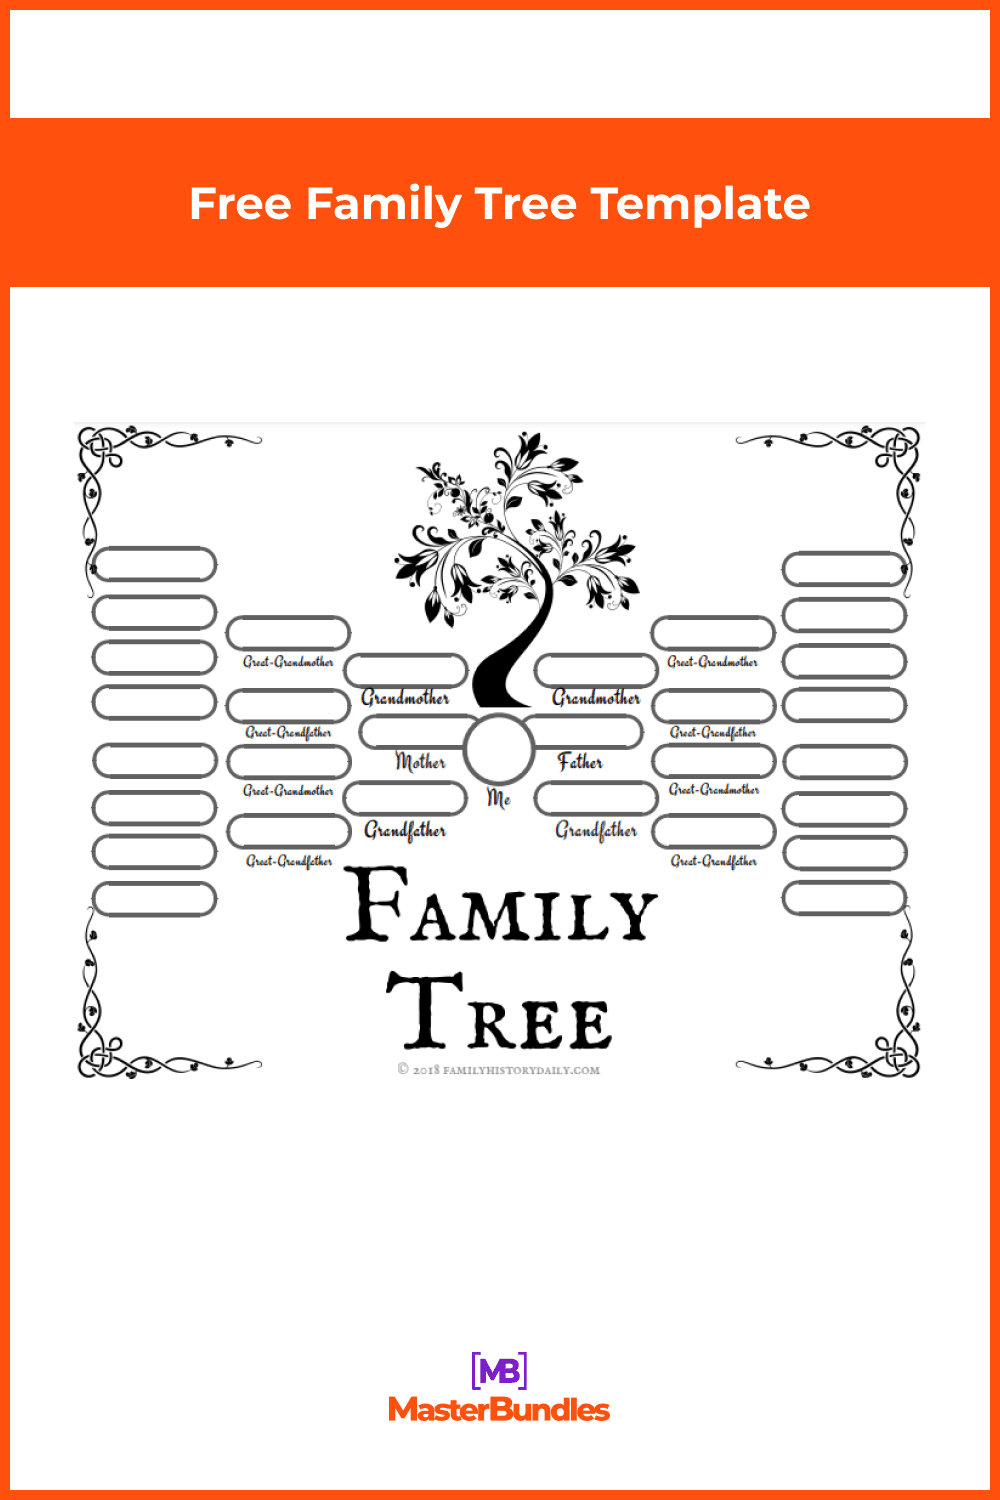 10-best-family-tree-templates-google-docs-for-2021-free-and-premium